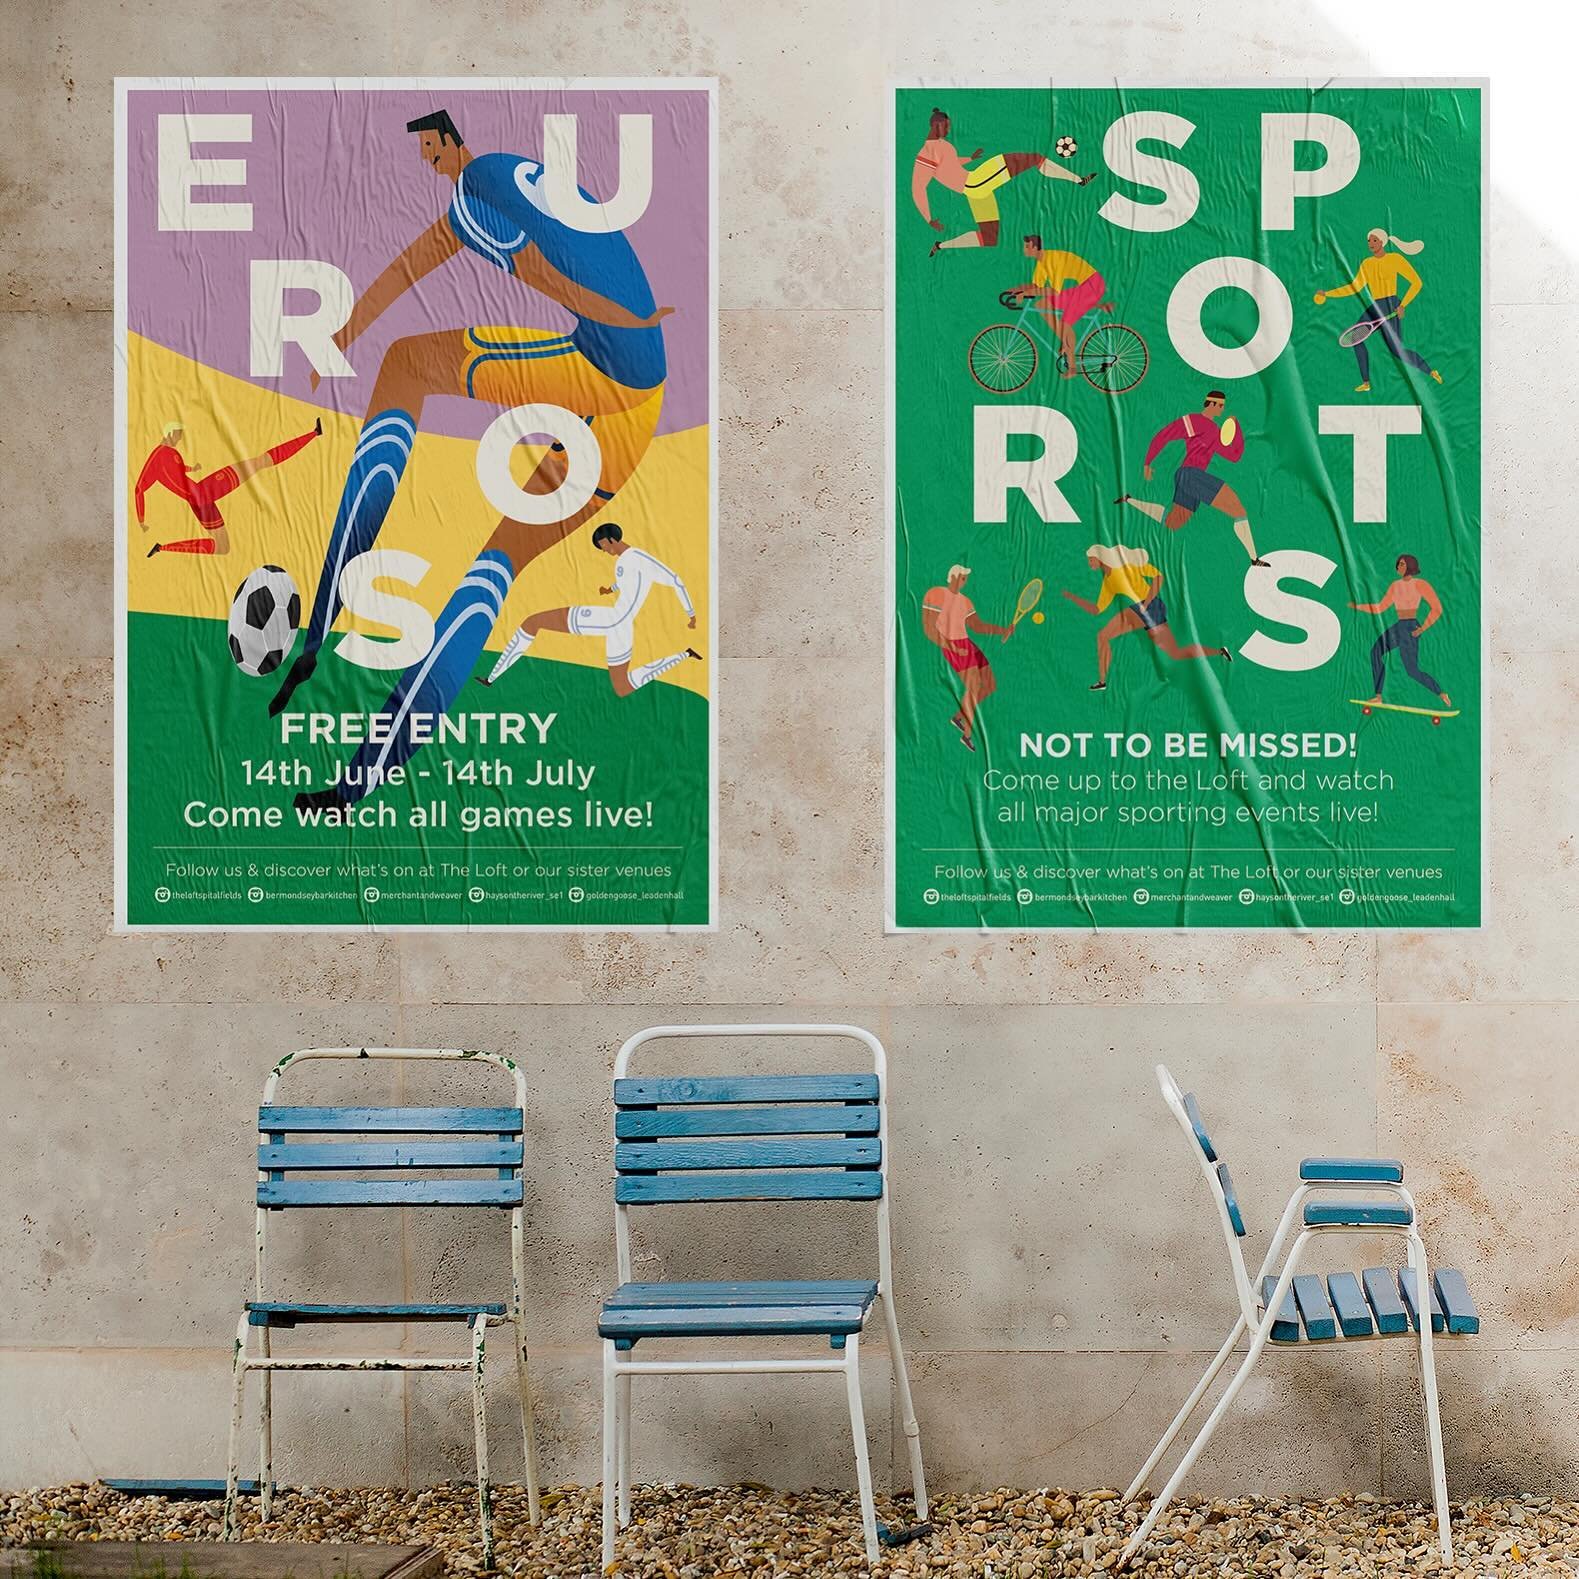 EUROS &amp; SPORTS posters for our friends at the @theloftspitalfields . Book ahead and get the best seats in the house for the Euros. Great venue in @spitalfieldse1 . S+B
-
-
-
-
#posterdesign #poster #illustration #typography #graphicdesign #skinan